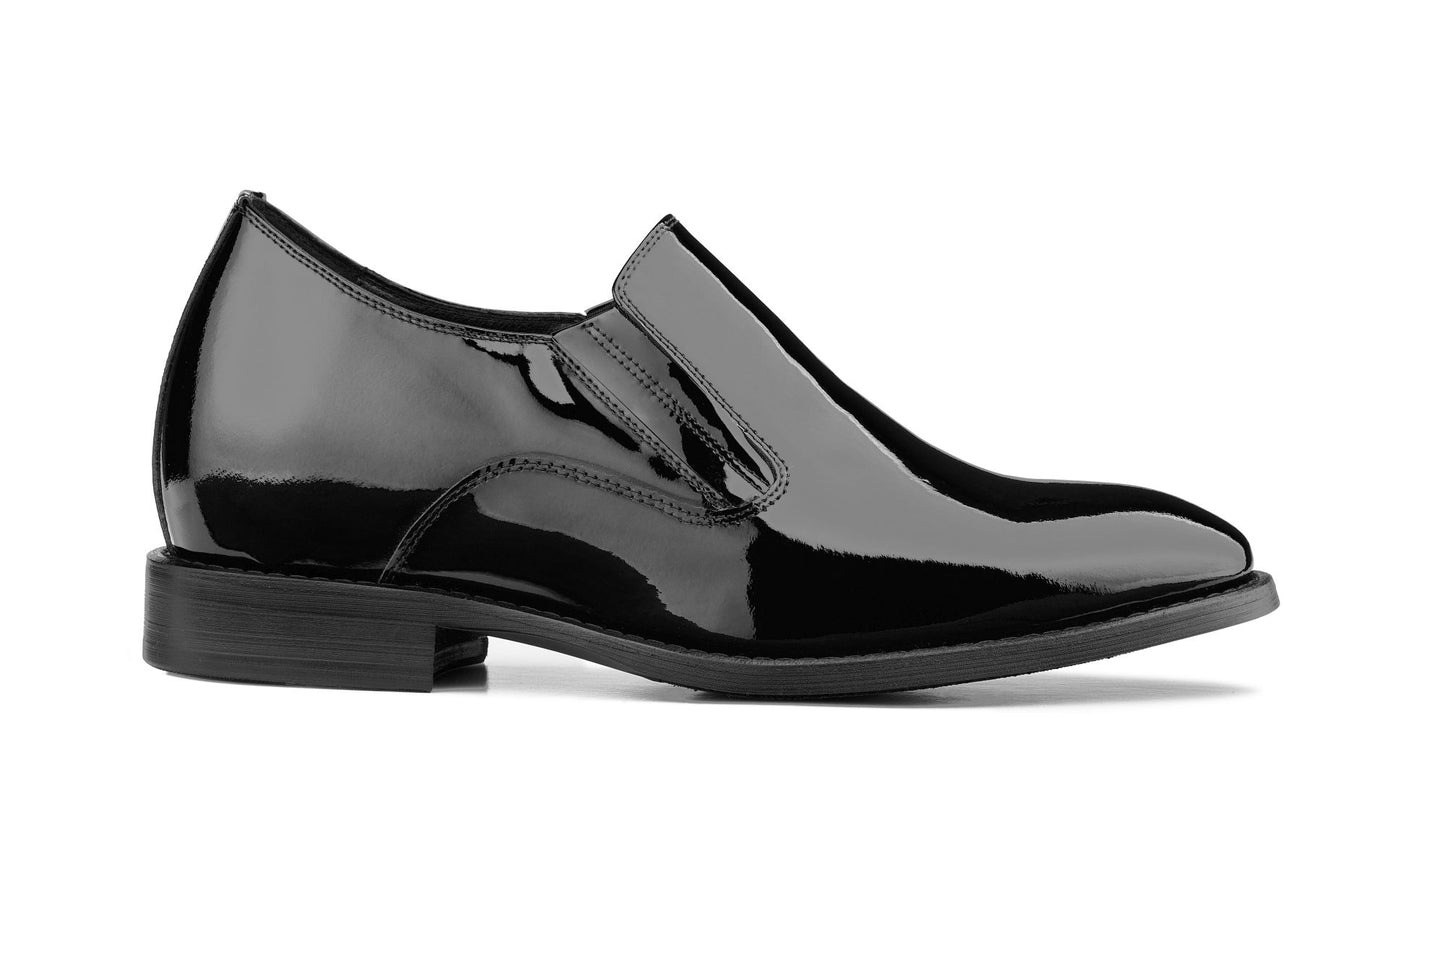 Elevator shoes height increase CALTO - Y7402 - 2.8 Inches Taller (Black) - Patent Leather Formal Dress Shoes